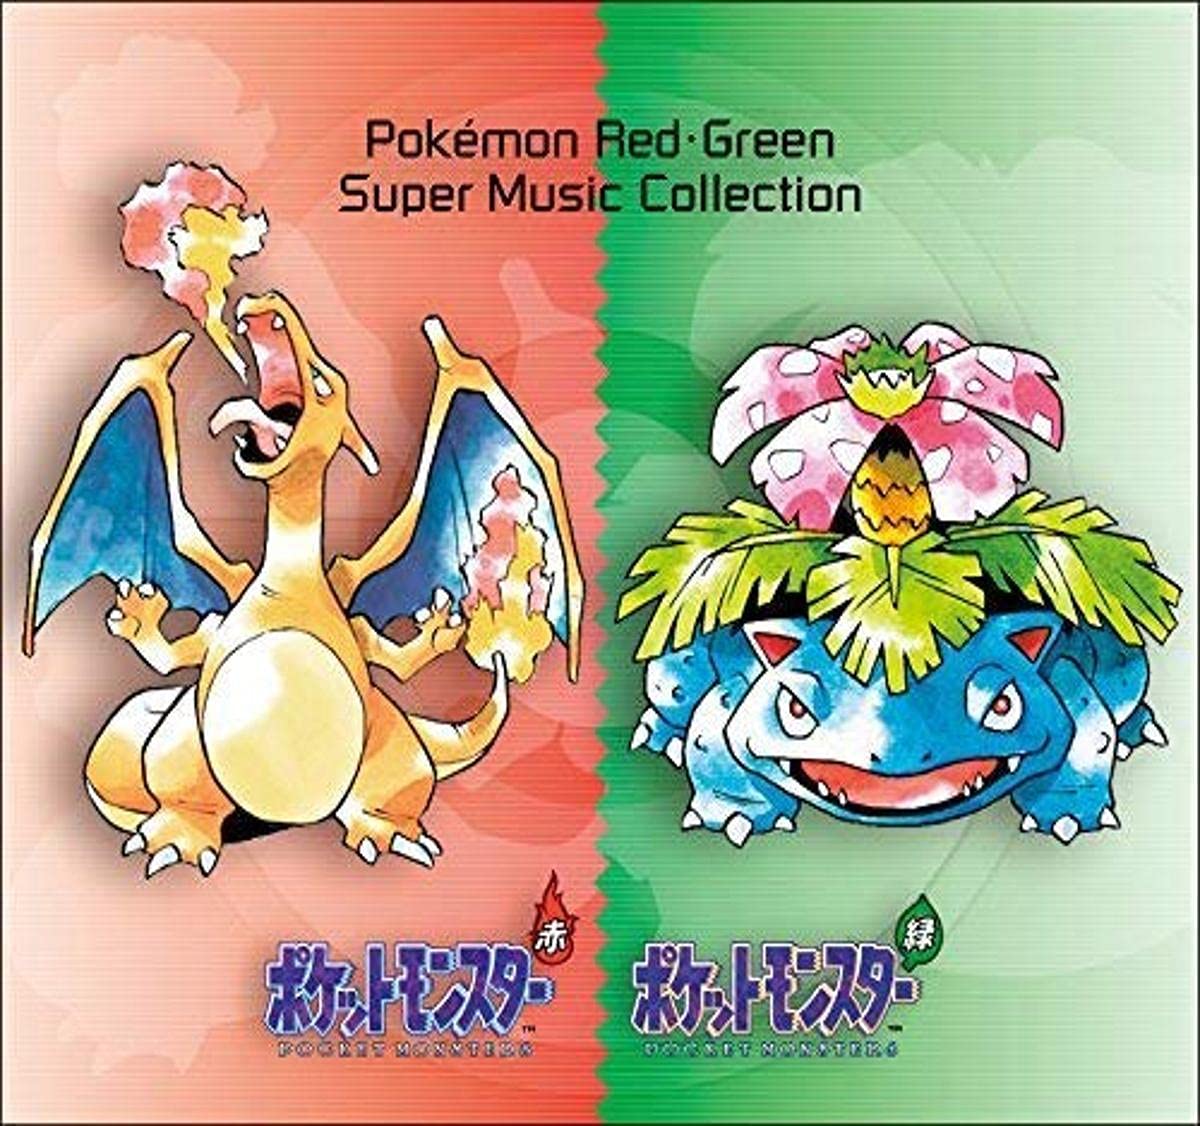 Pokemon Red Green Super Music Collection 4 CD OVCP-0006 Game Music Soundtrack